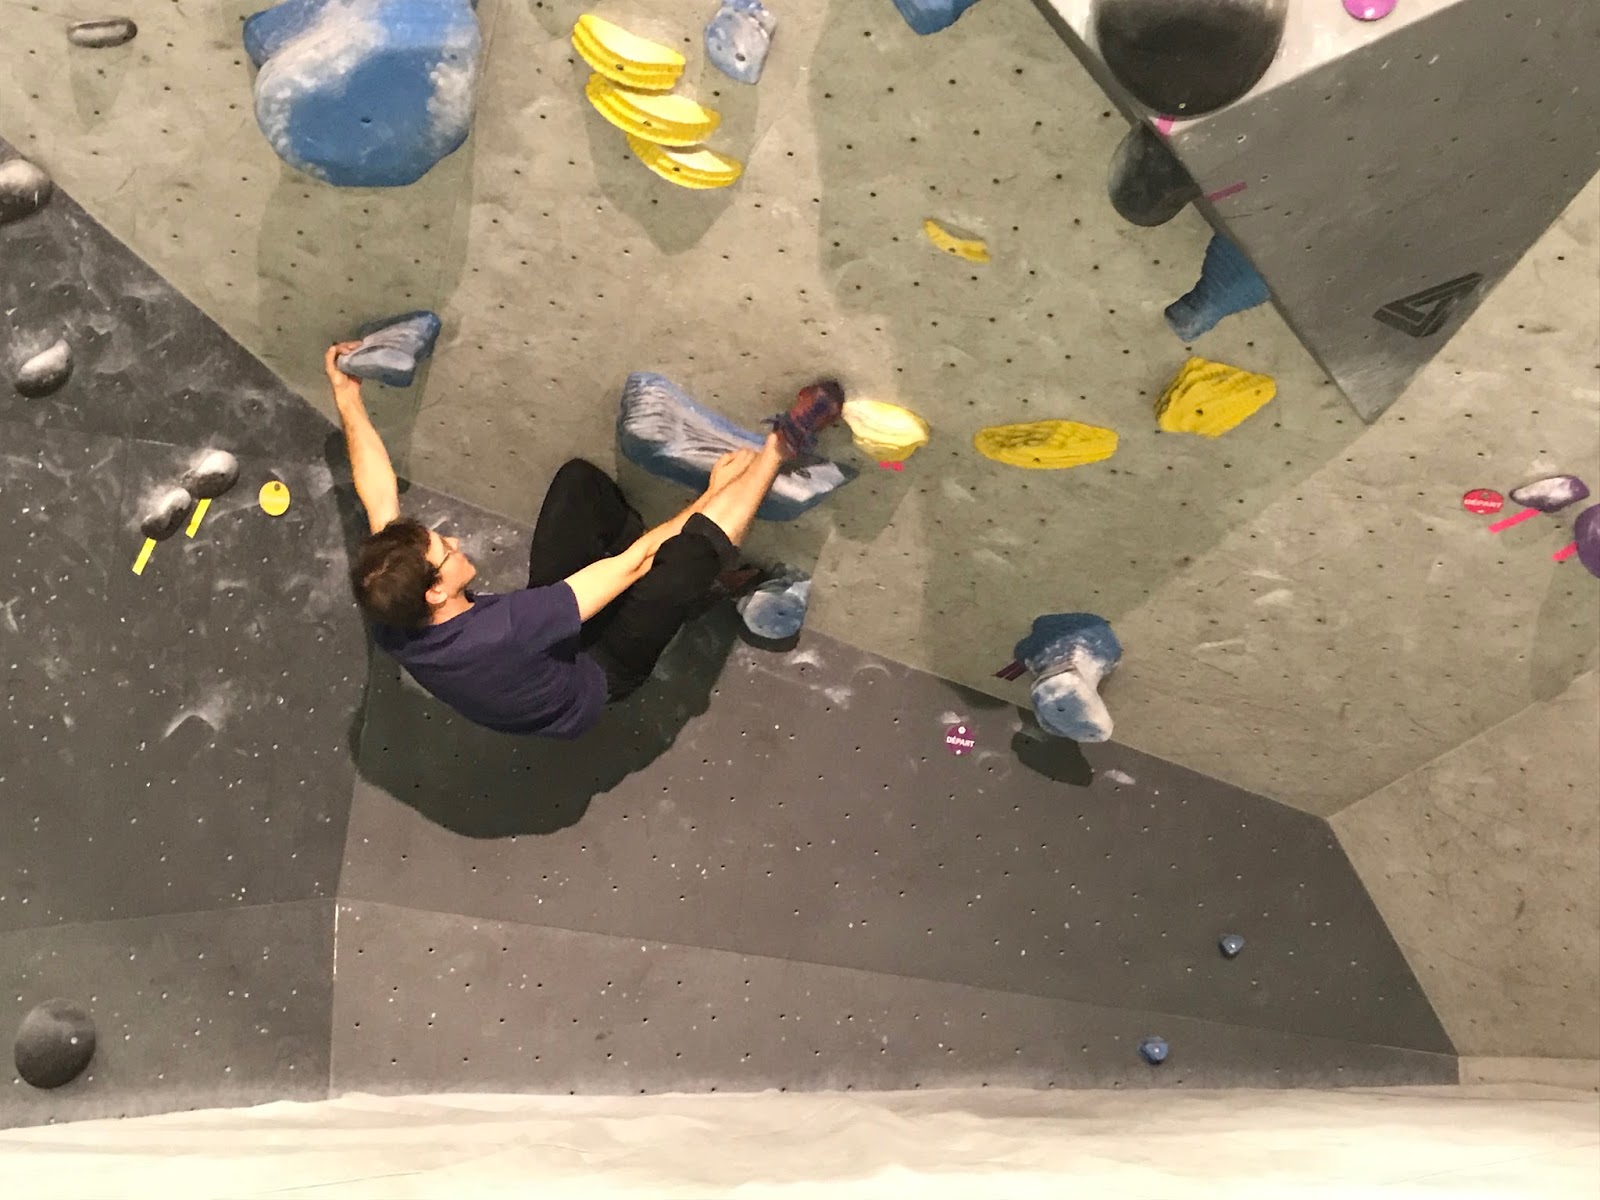 Climbing in Montreal: Getting Started